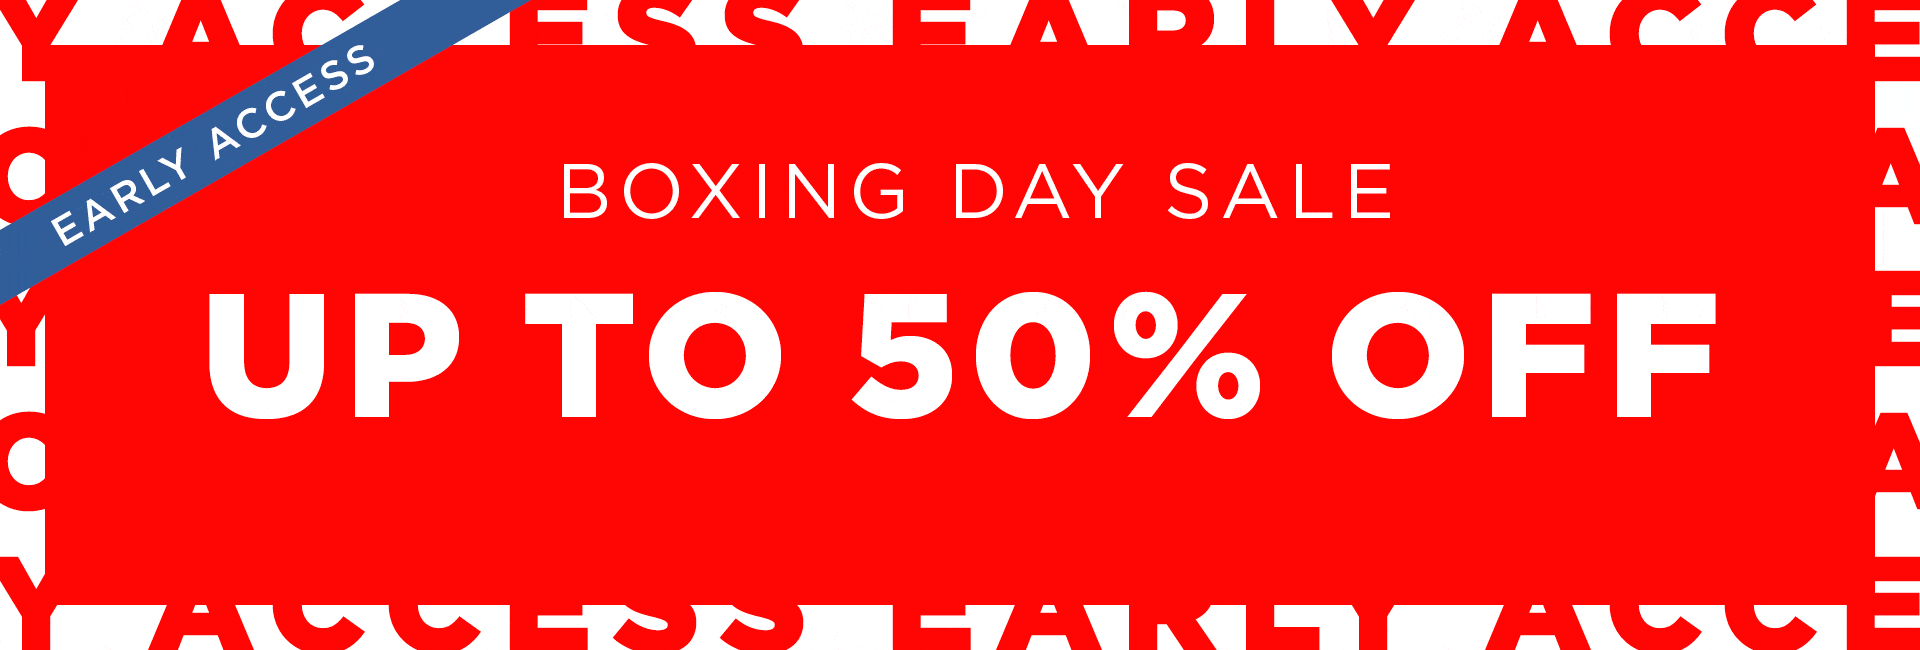 Skechers Boxing Day sale up to 50% OFF on men, women & kids styles